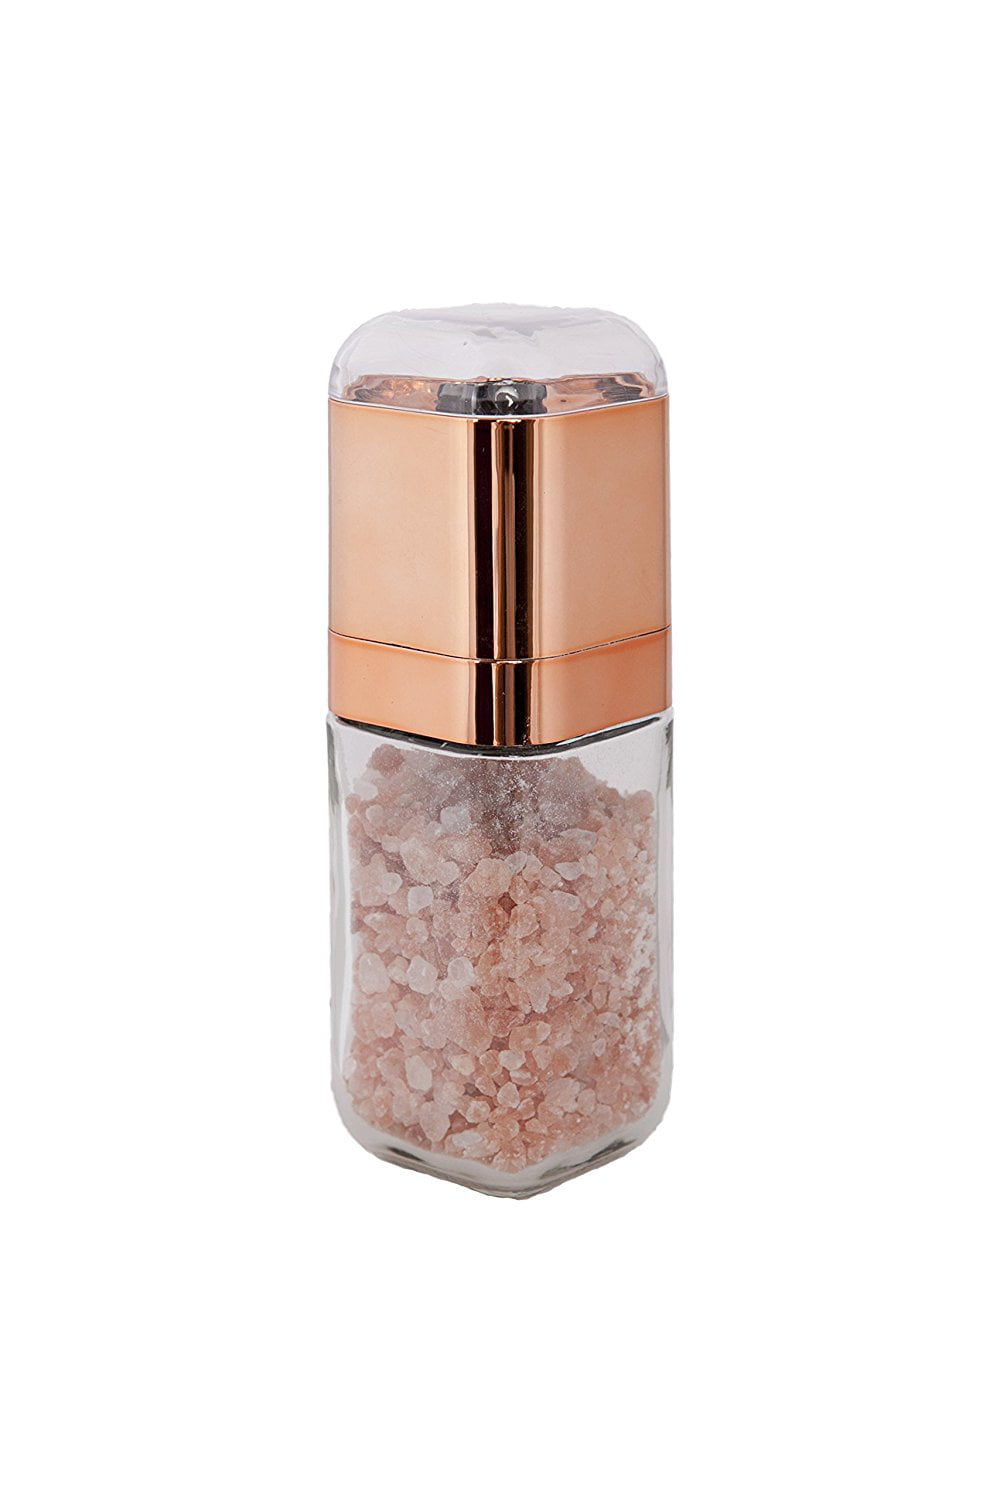 Glass Body & Spoon for Pepper lArtisan Potelé Salt and Pepper Grinders Refillable Stainless Steel Salt and Pepper Grinder Set in Rose Gold-Copper w/Ceramic Grinder Himalayan Sea Salt or Spices 